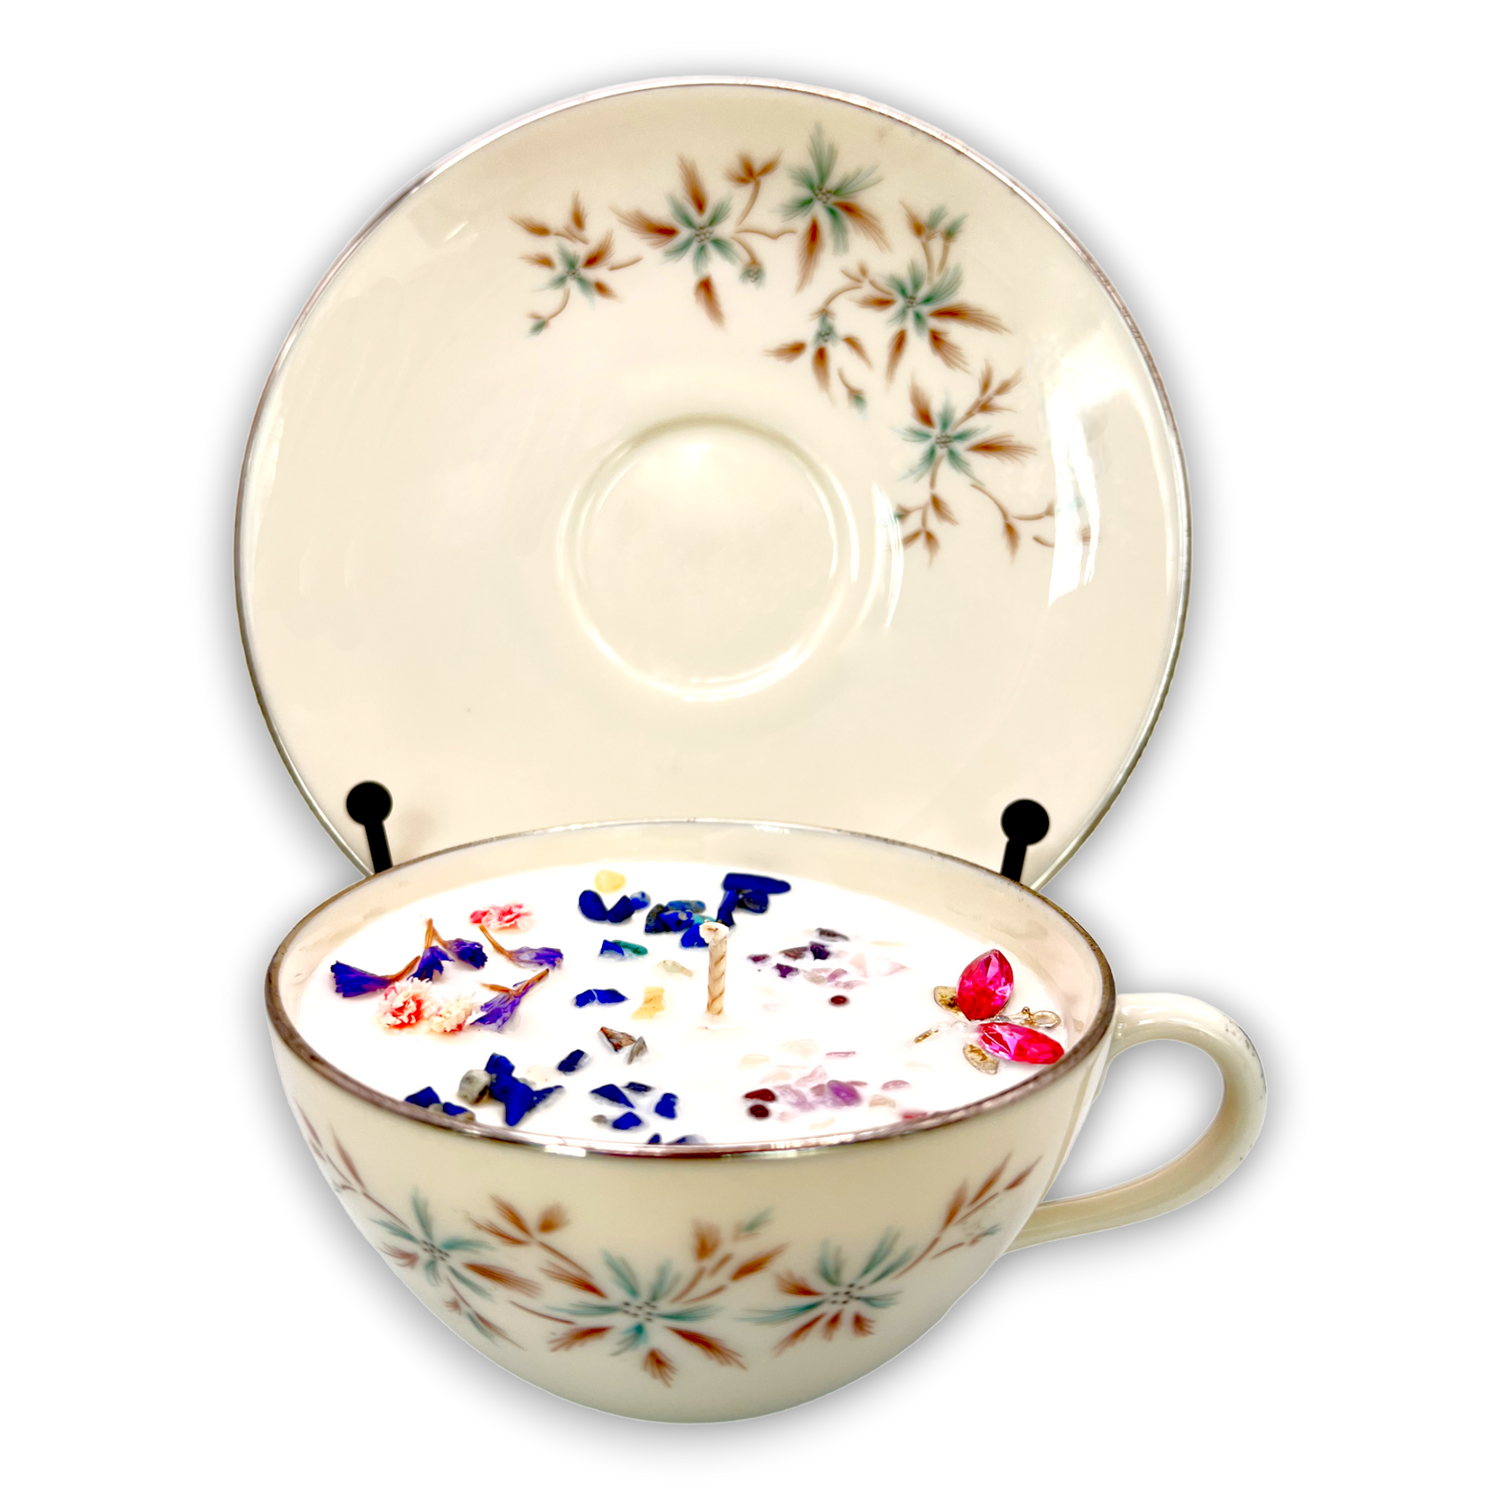 Dry Gin & Cypress Vintage Teacups: A Sophisticated Fusion of Botanicals and Elegance